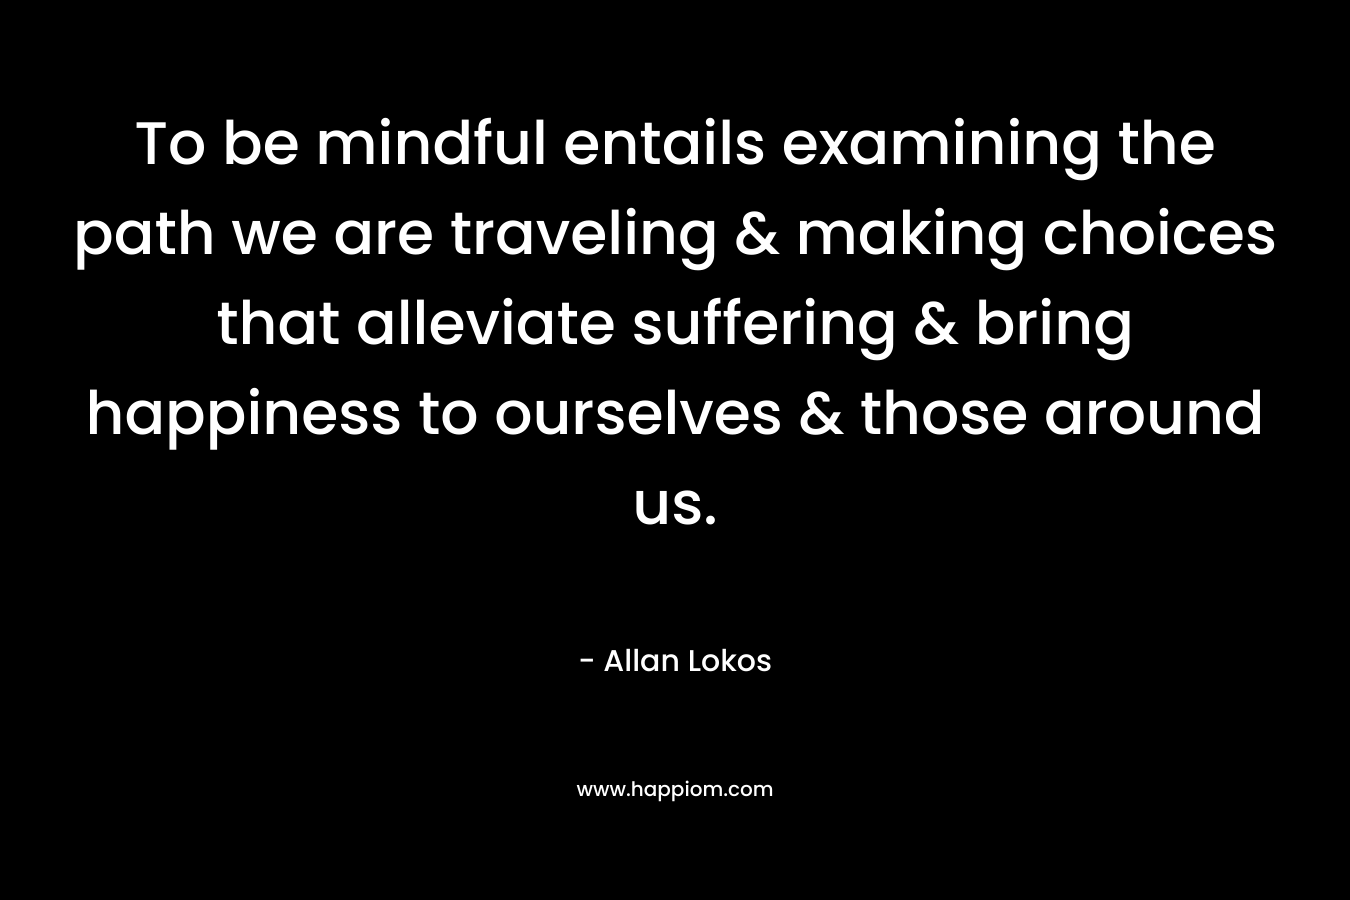 To be mindful entails examining the path we are traveling & making choices that alleviate suffering & bring happiness to ourselves & those around us.